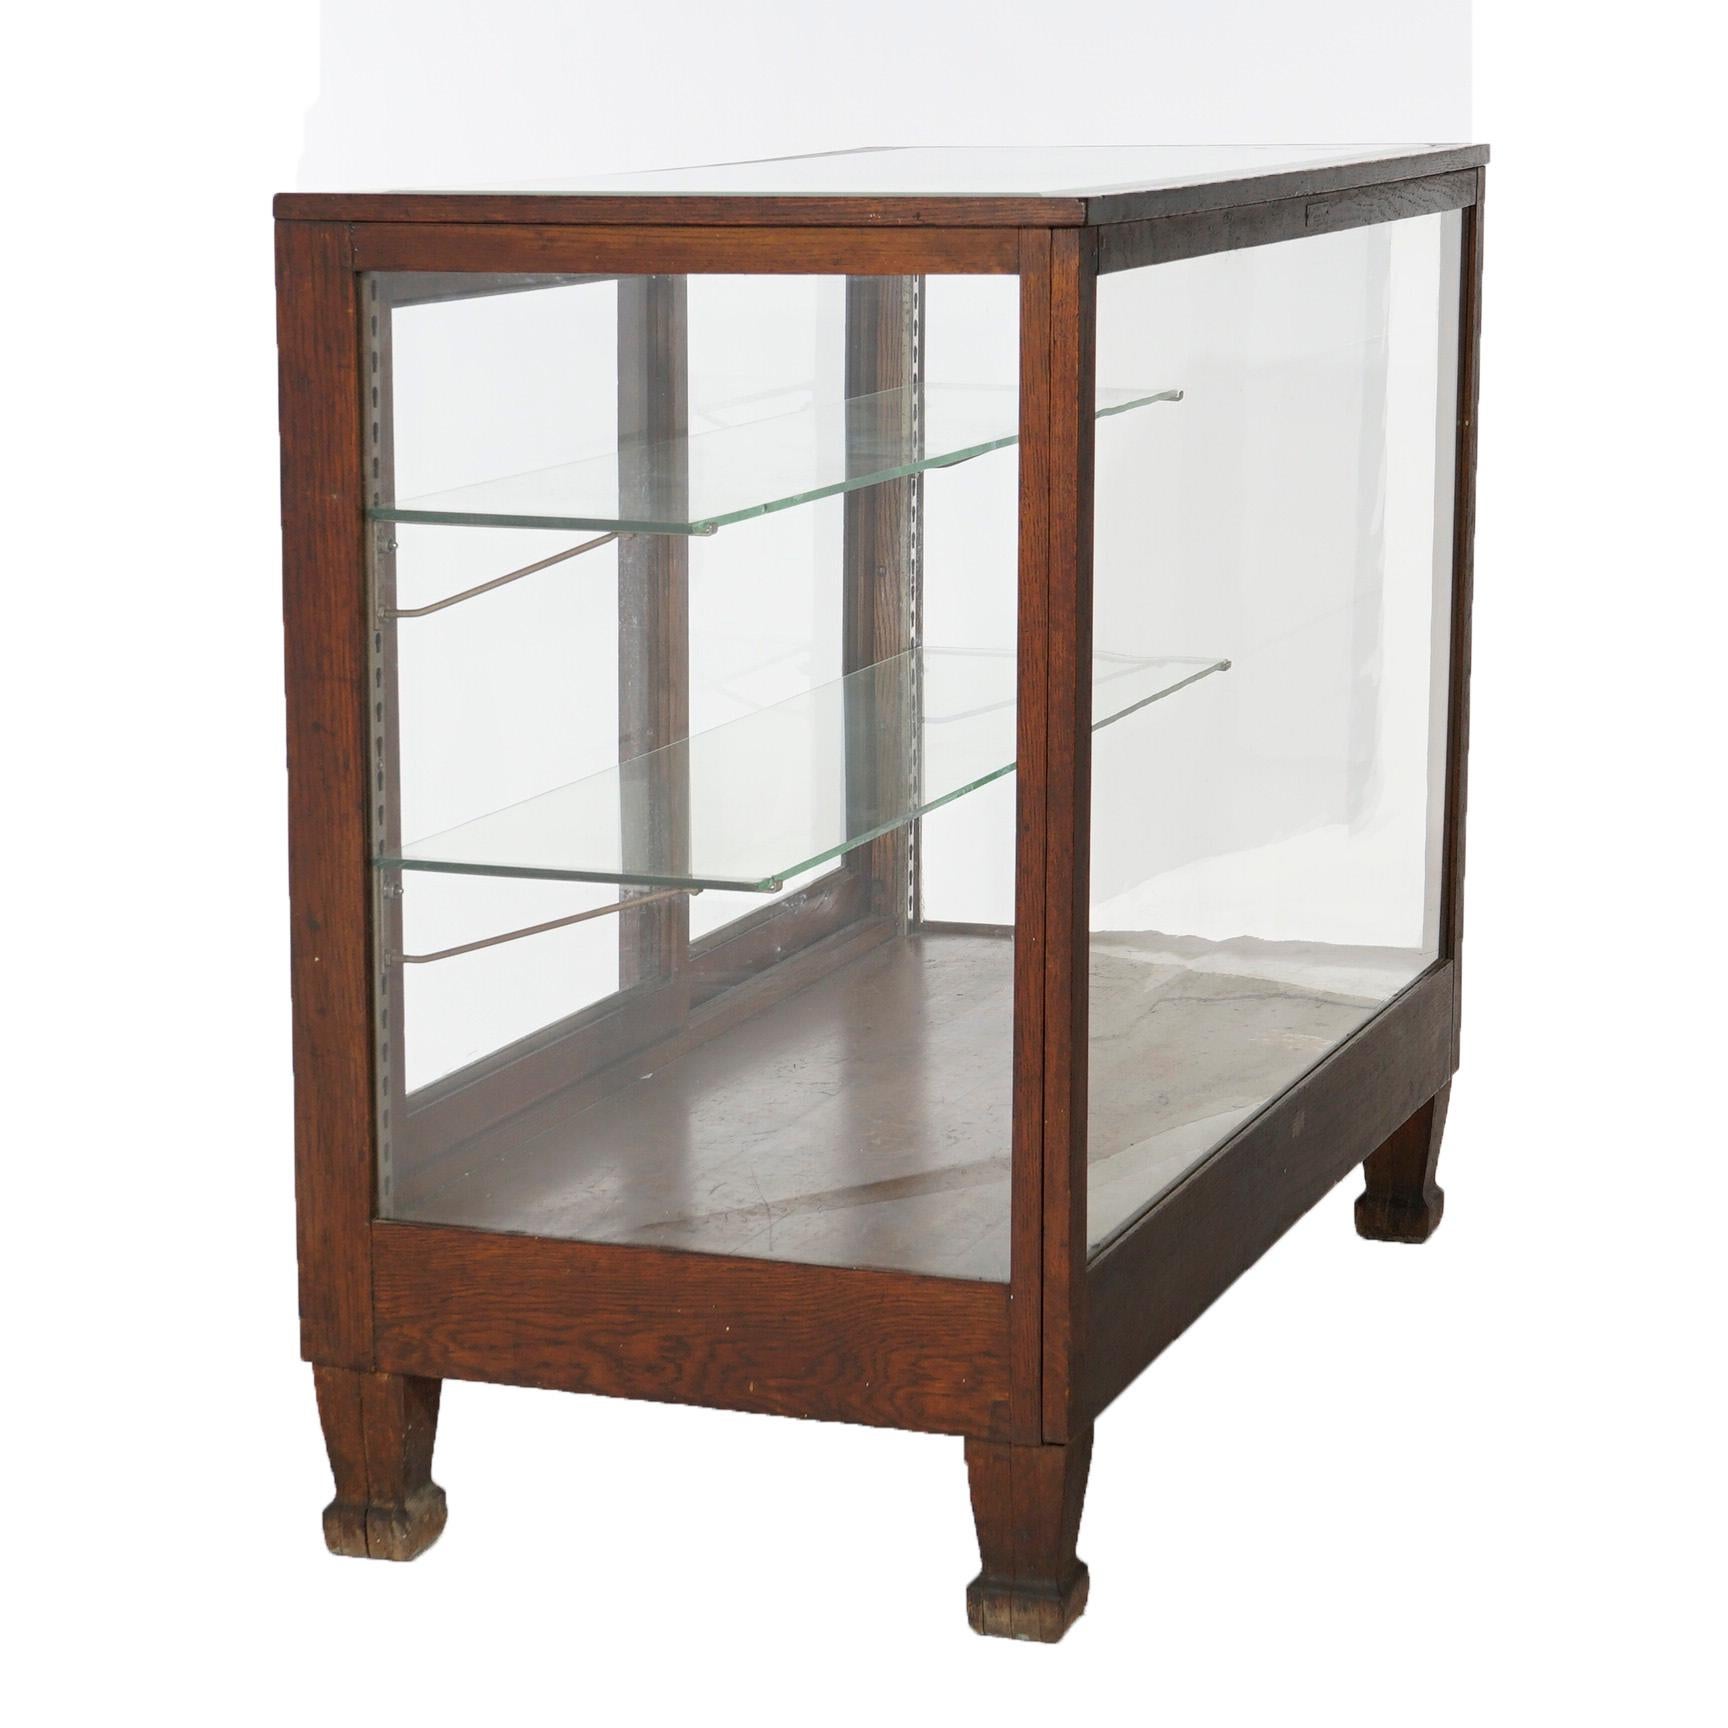 20th Century Antique Arts & Crafts Oak & Glass Country Store Counter Display Showcase, c1900